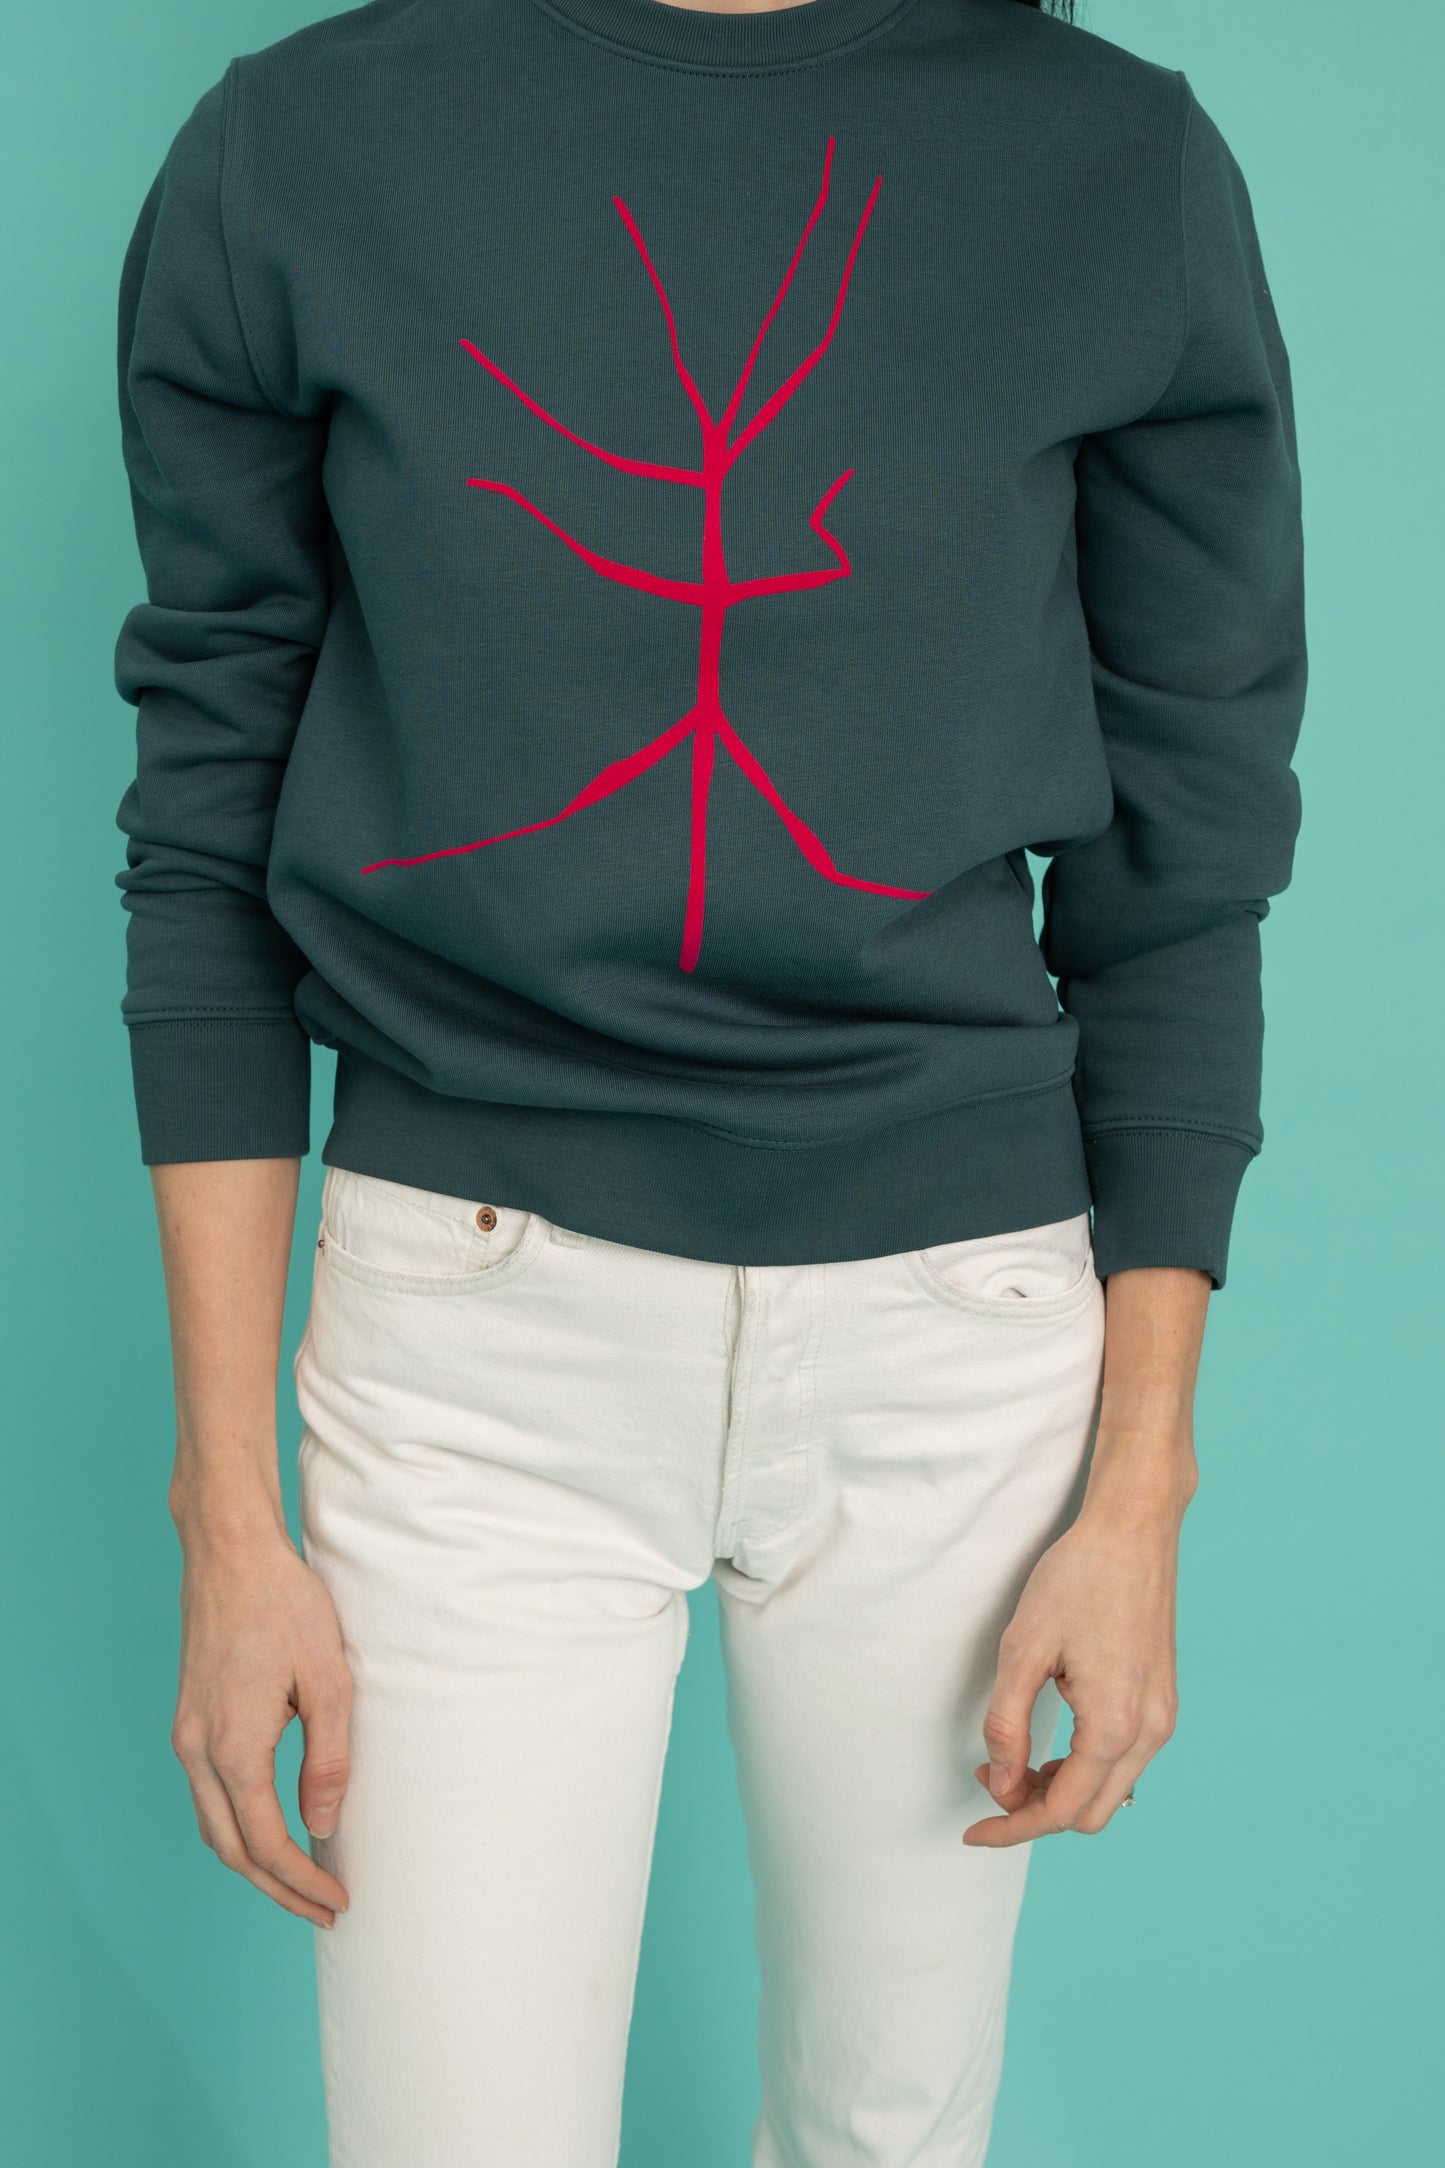 Sweater with a pink walking stick